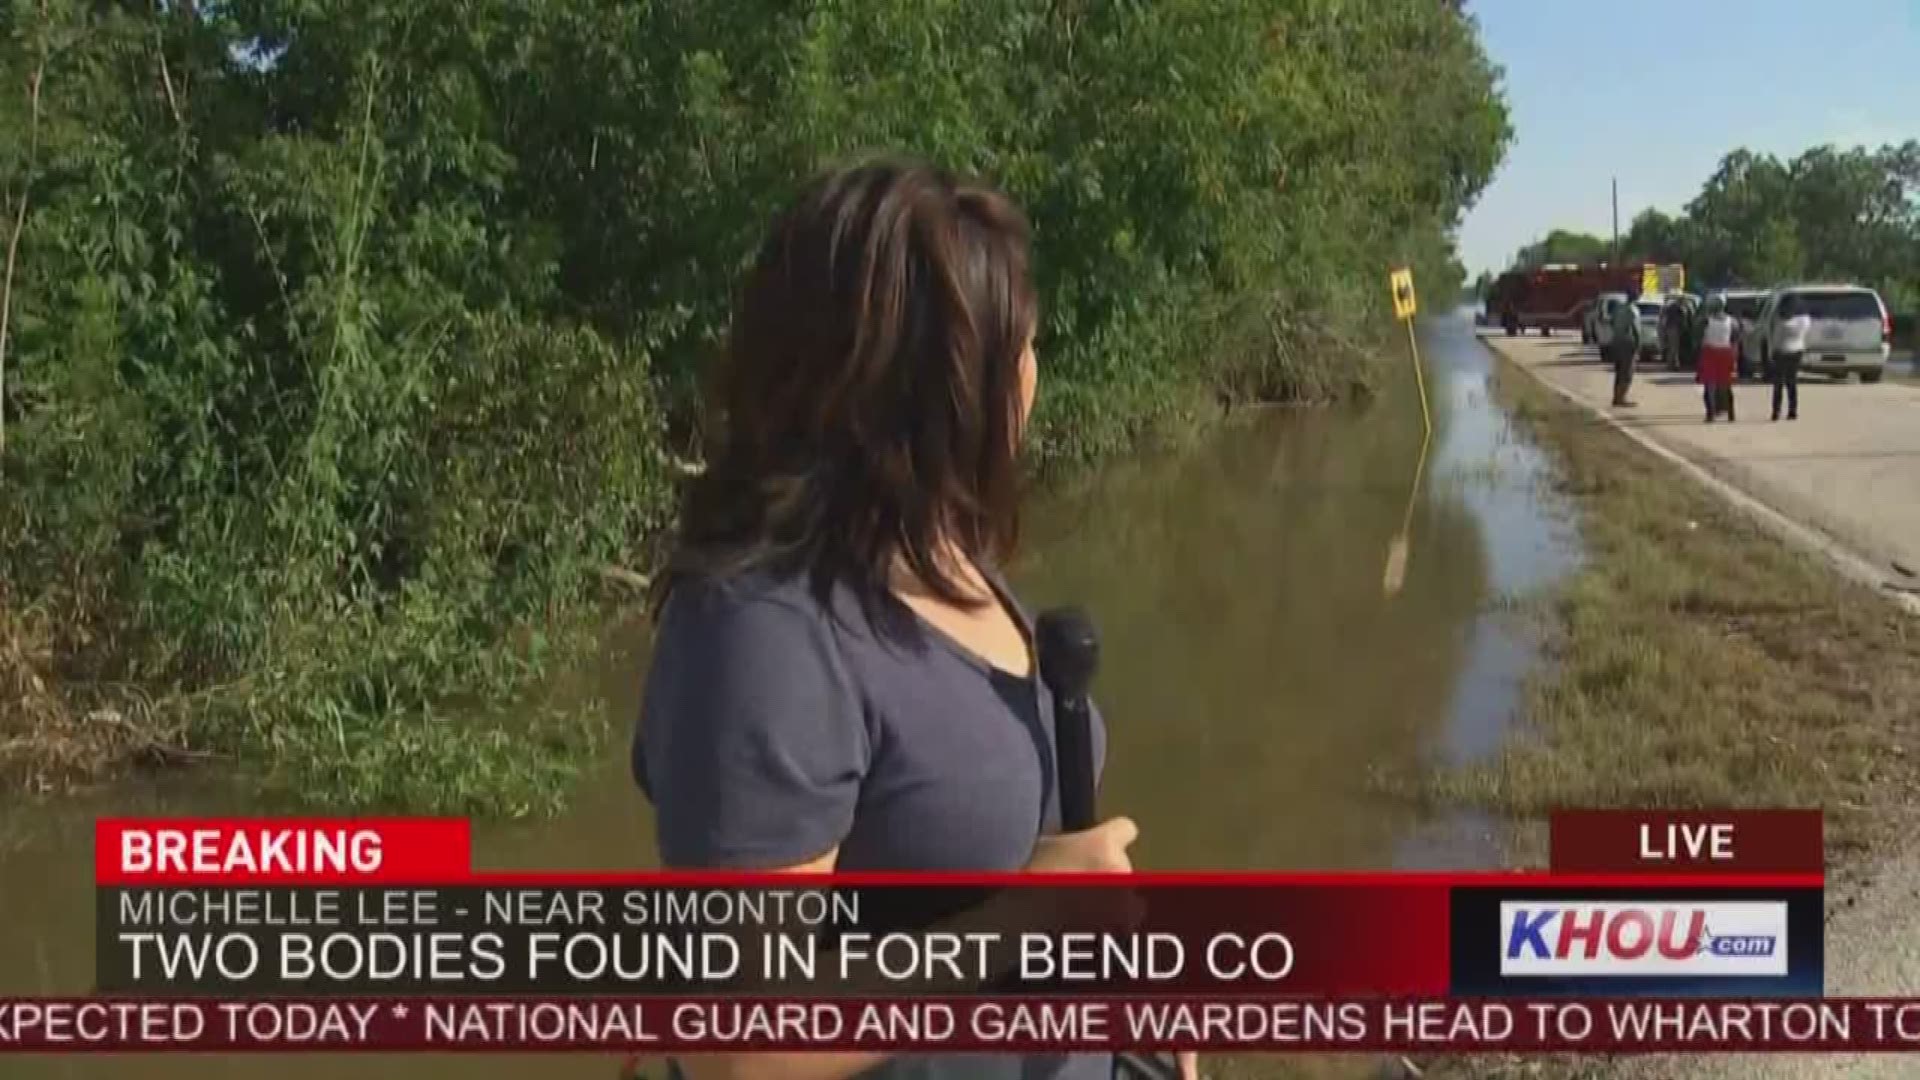 A recovery effort is underway to find the bodies of a husband and wife who drowned in Fort Bend while trying to check on the husband's uncle. 8/30 5 p.m.